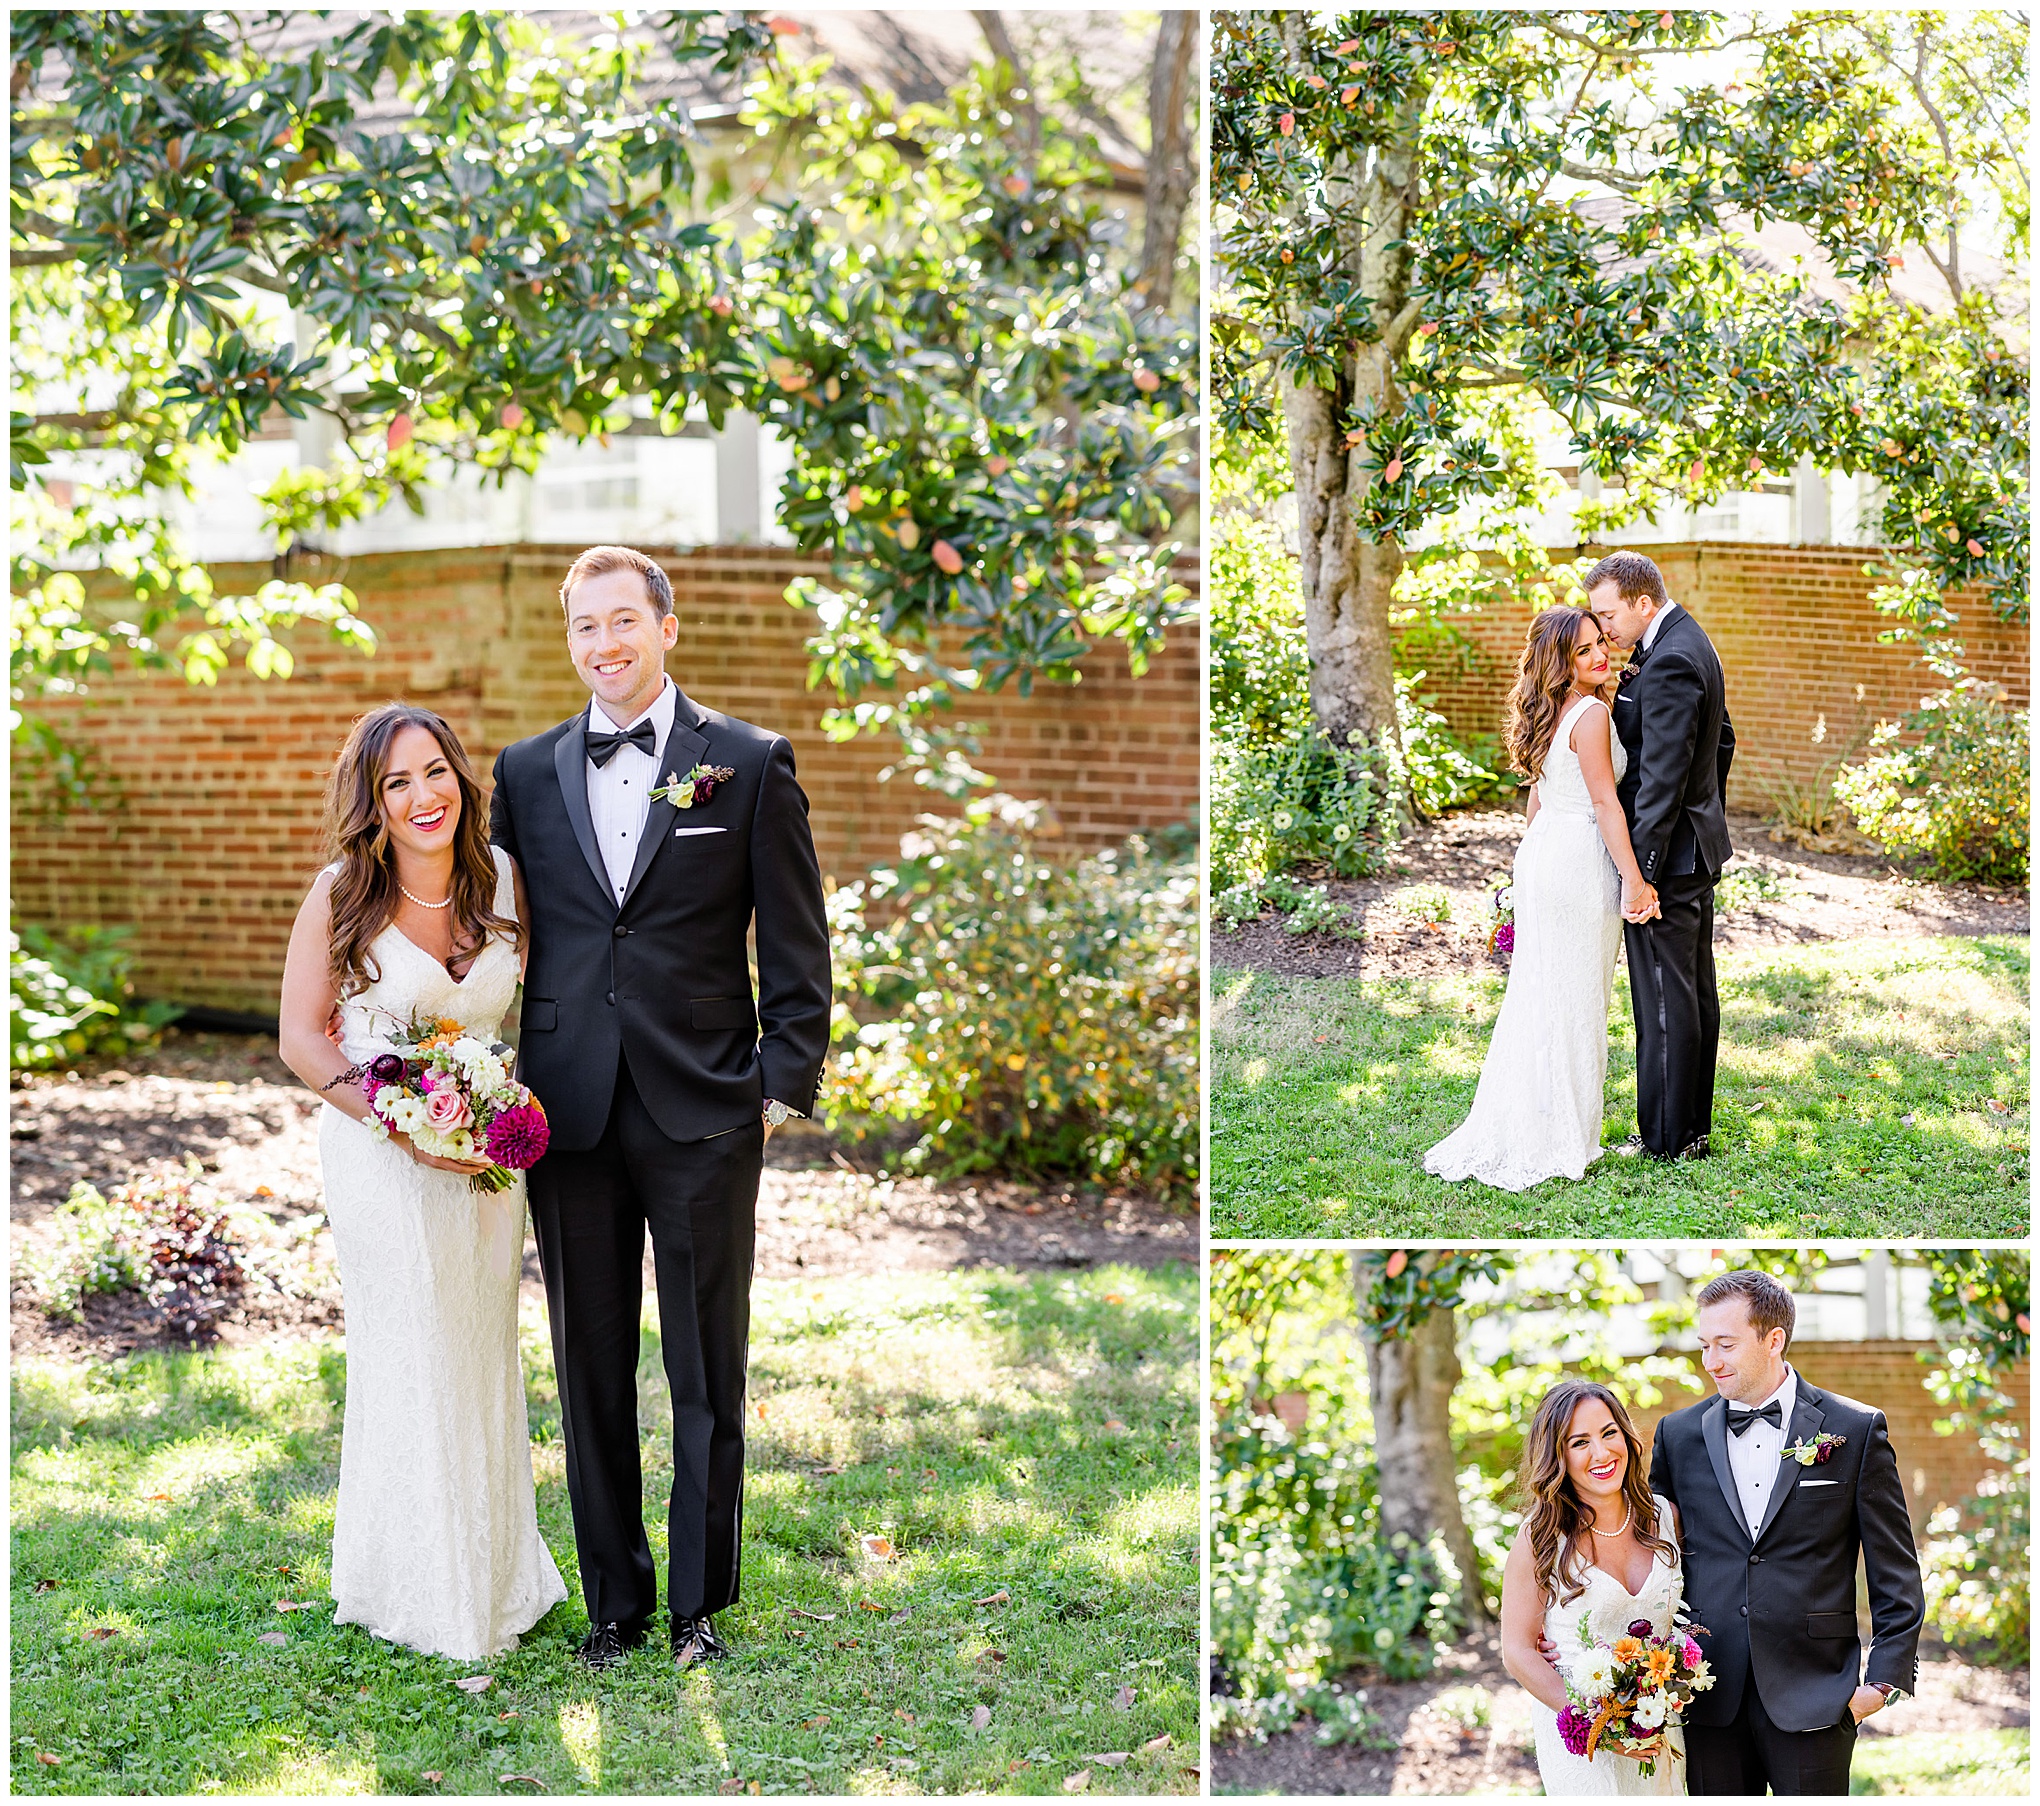 early autumn River Farm wedding, Alexandria Virginia wedding, Alexandria wedding venues, Alexandria Virginia photographer, Alexandria wedding photographer, DC wedding photographer, DC wedding venues, DC wedding photography, waterfront wedding venue, DC autumn wedding, DC natural light wedding photographer, DC natural light wedding photographer, Rachel E.H. Photography, couple holding hands, couple smiling at camera, davids bridal, Kait and Shima from Salon Monte